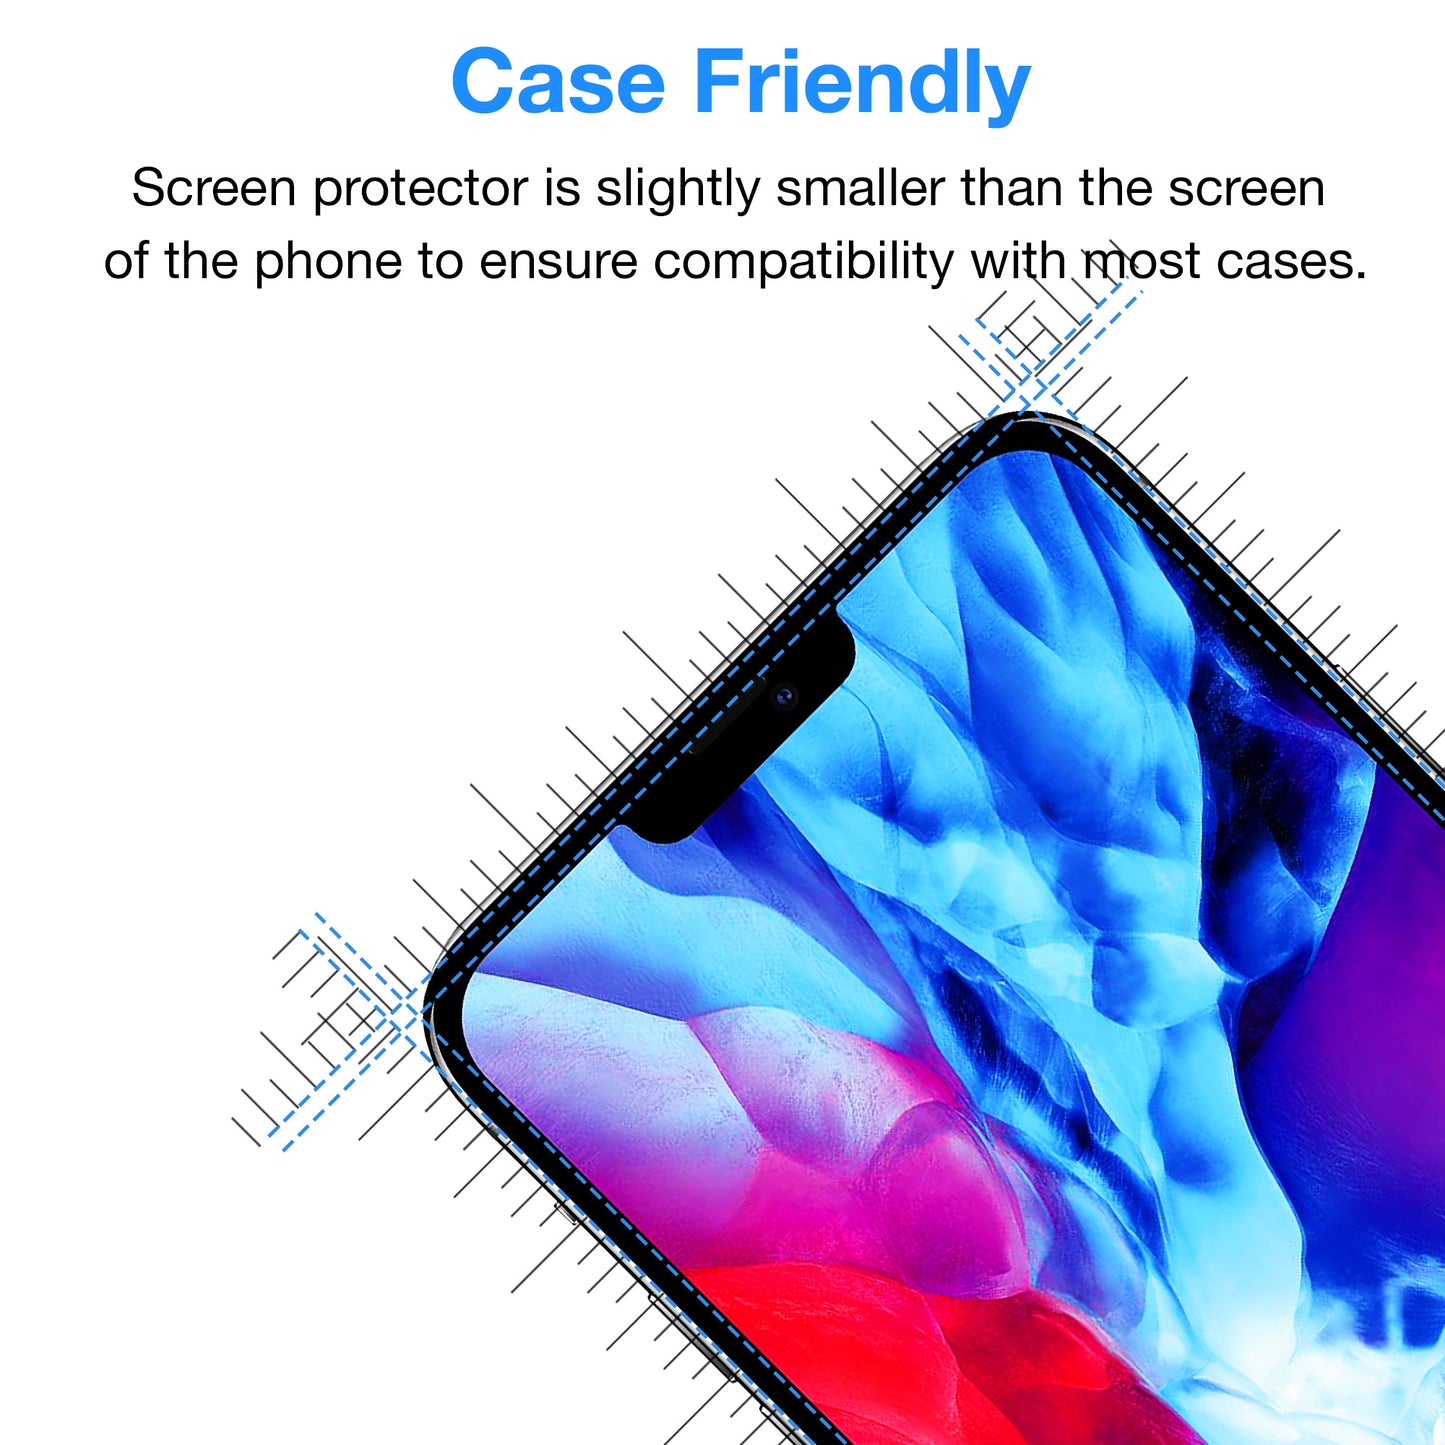 [3 Pack] MEZON Apple iPhone 12 Pro Max (6.7") Ultra Clear Screen Protector Case Friendly Film (iPhone 12 Pro Max, Clear)